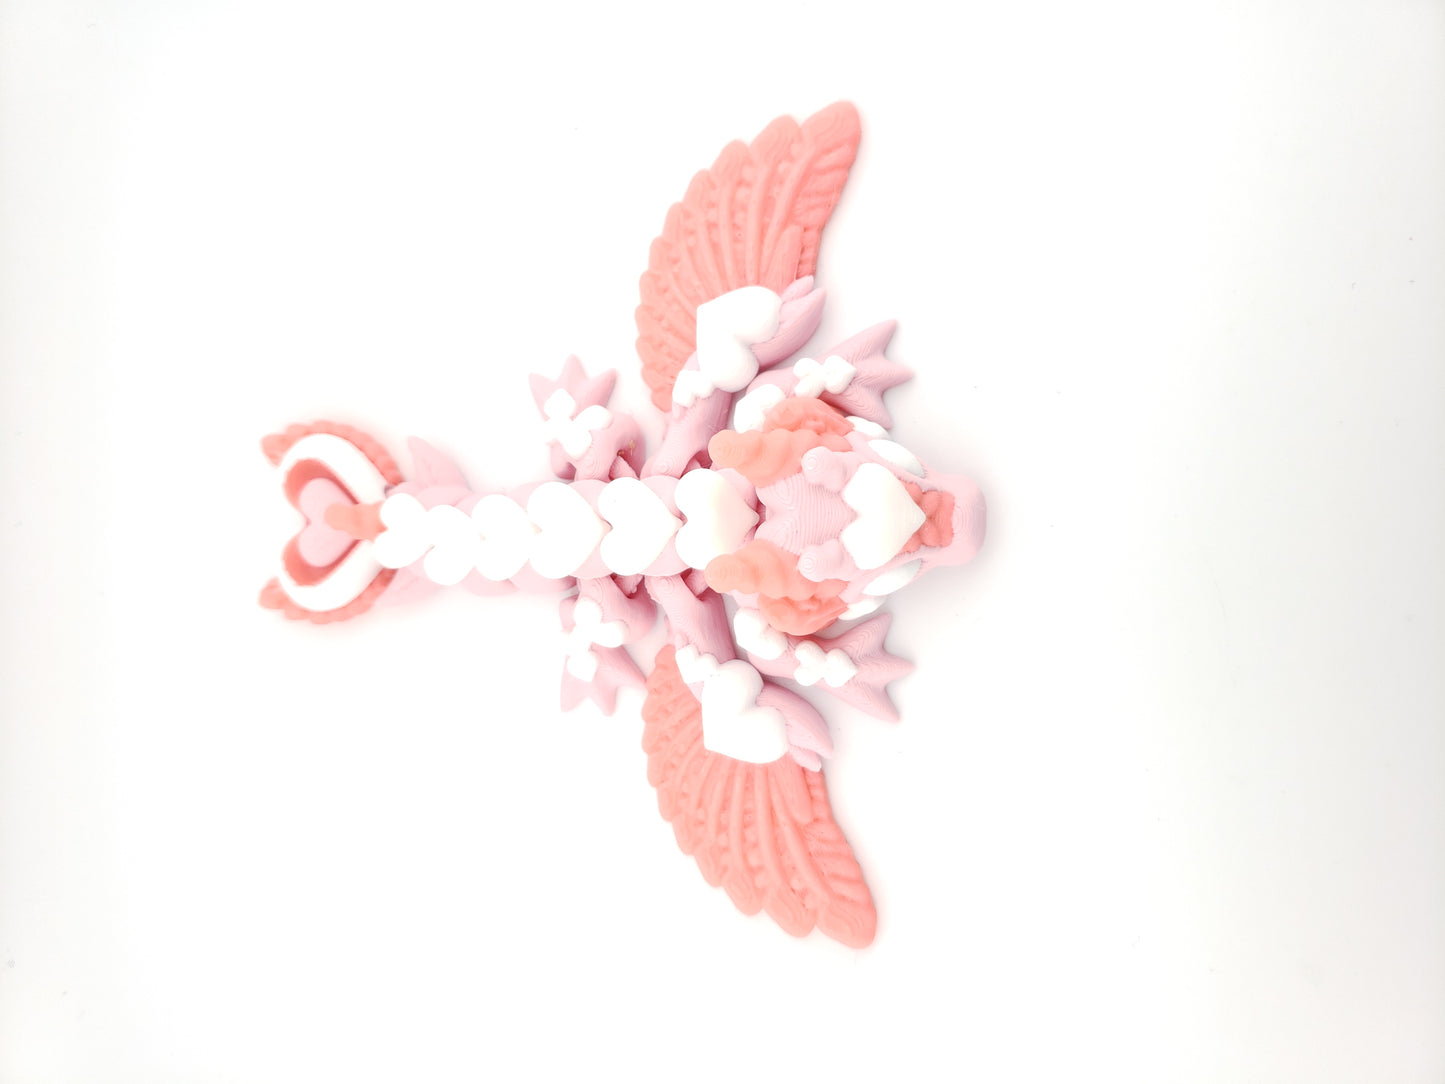 1 Articulated Baby Love Dragon - 3D Printed Fantasy Creature - Cinderwing3d - Valentines Day Heart Dragon